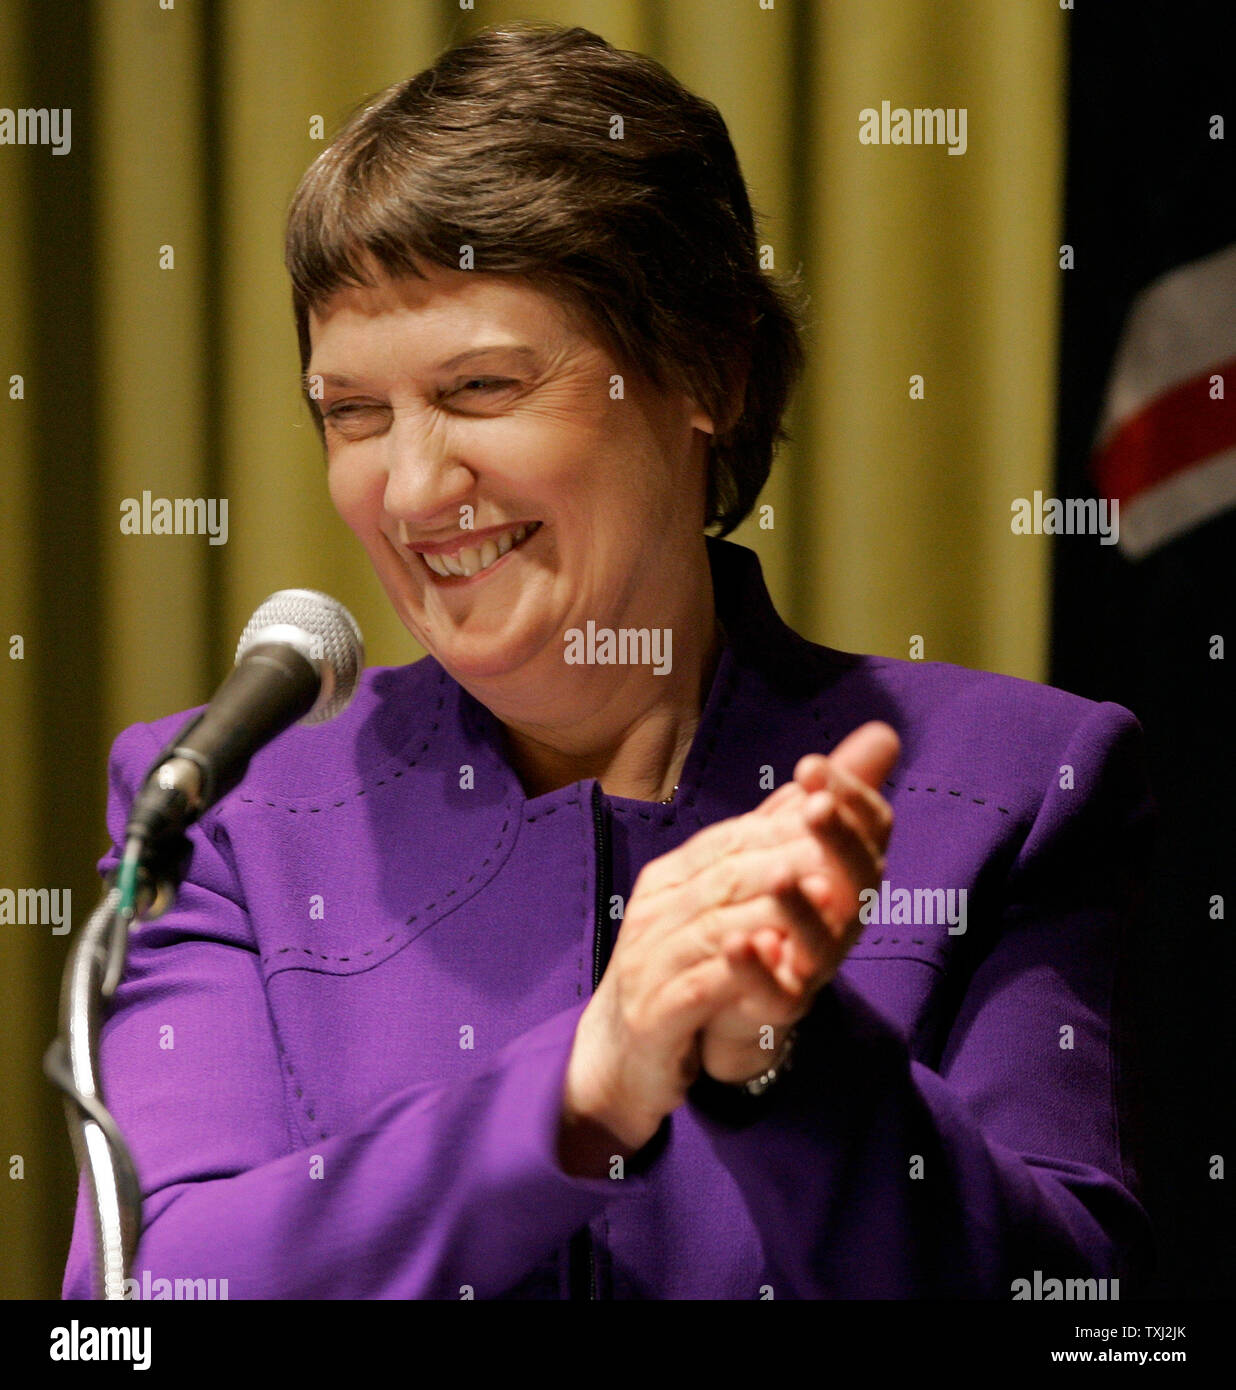 Helen Clark, prime minister of New Zealand, delivers an address to the Chicago Council on Global Affairs on March 22, 2007 in Chicago. Clark discussed trade and the challenge of globalization in her address. (UPI Photo/Brian Kersey) Stock Photo